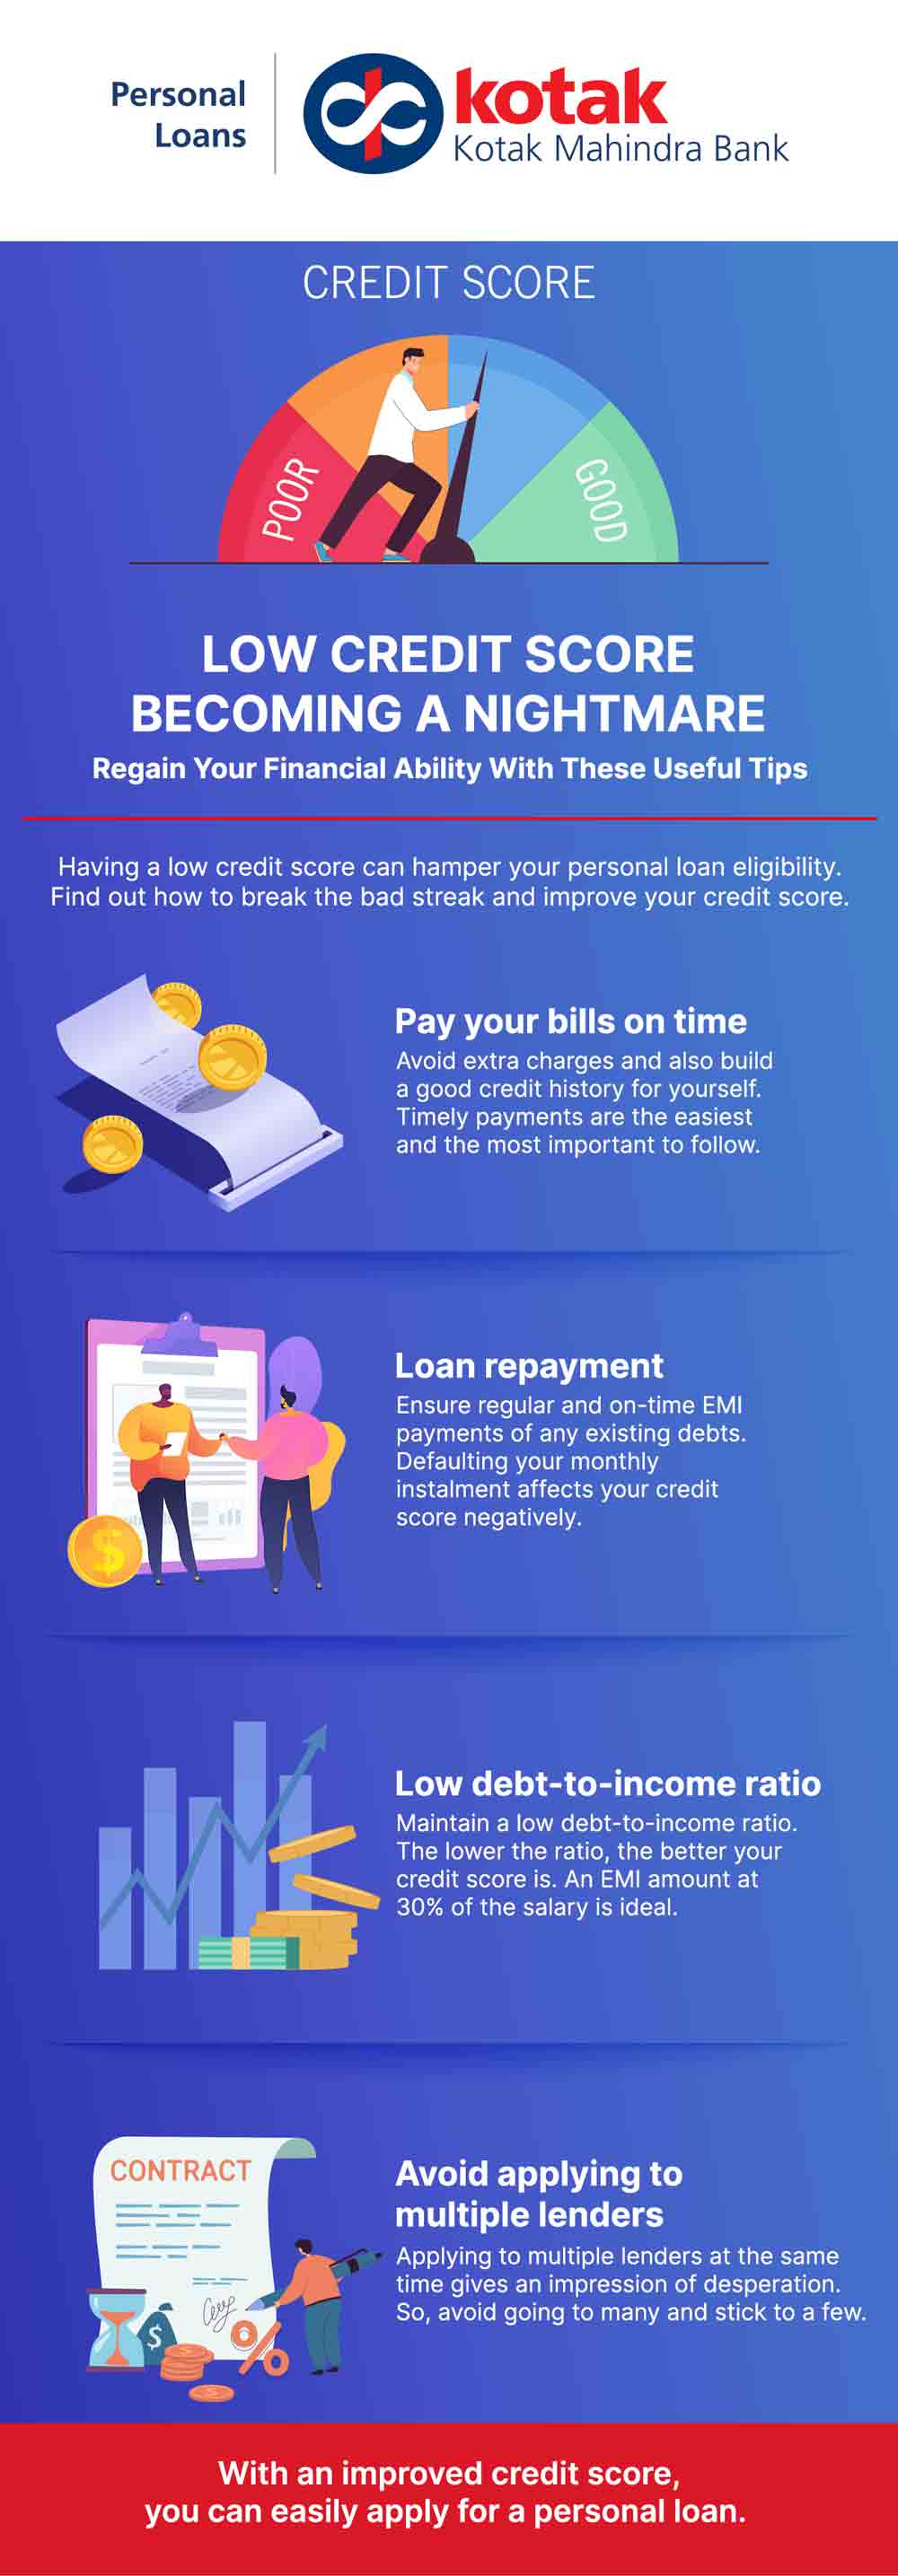 low-credit-score-heres-how-you-can-improve-it-to-get-a-better-personal-loan-rate.